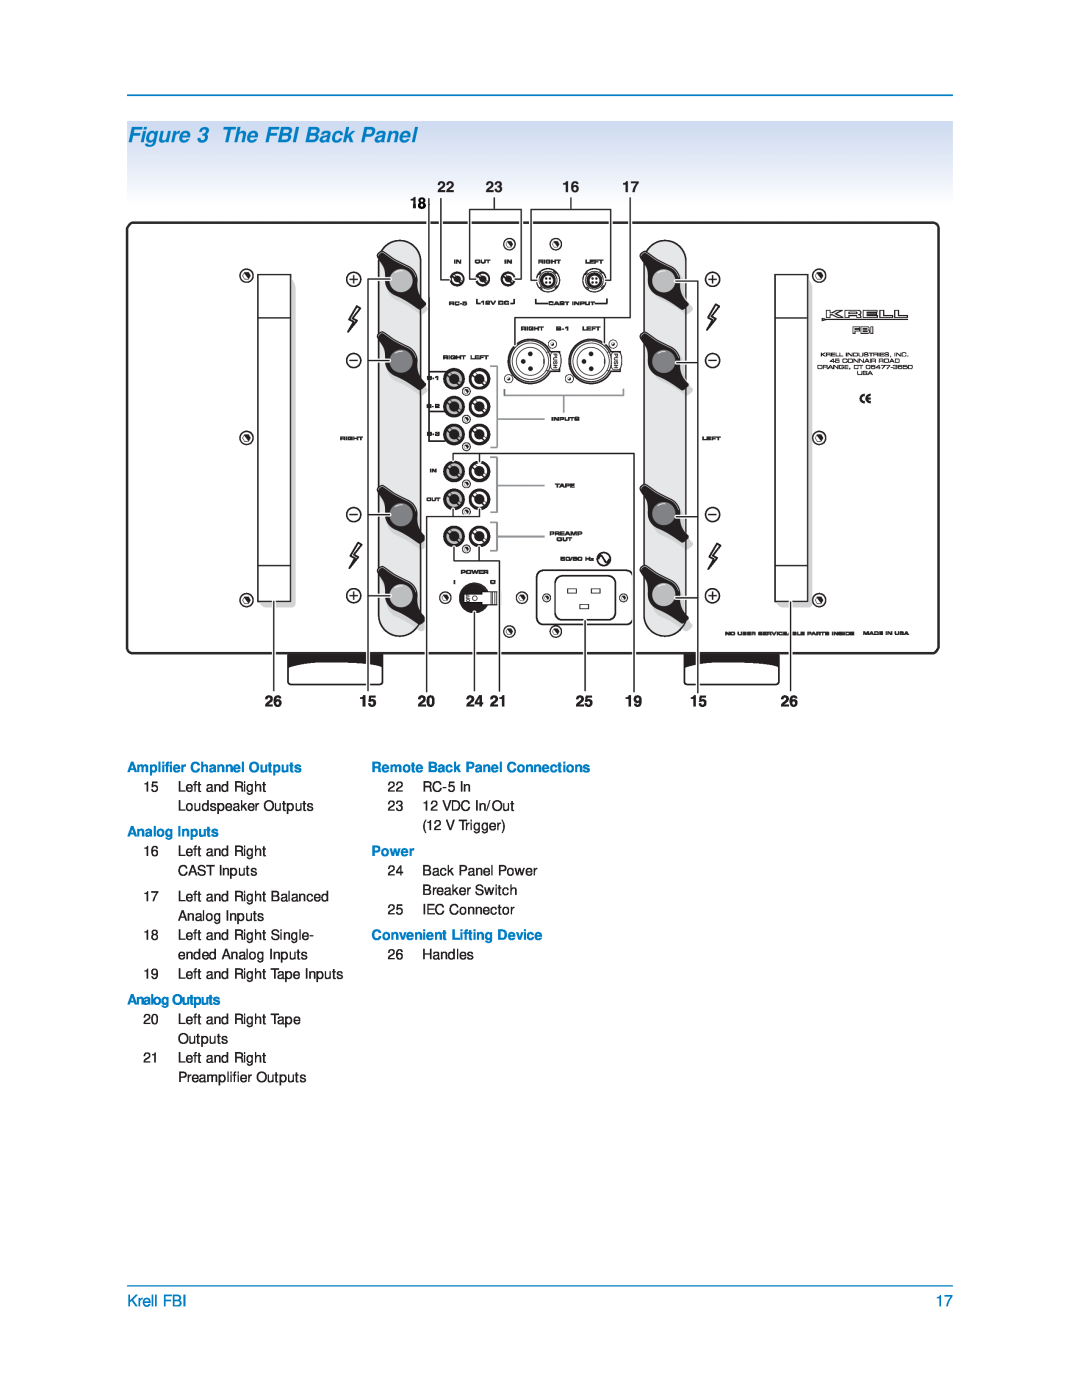 Krell Industries manual The FBI Back Panel, Krell FBI, Amplifier Channel Outputs, Analog Inputs, Analog Outputs, Power 